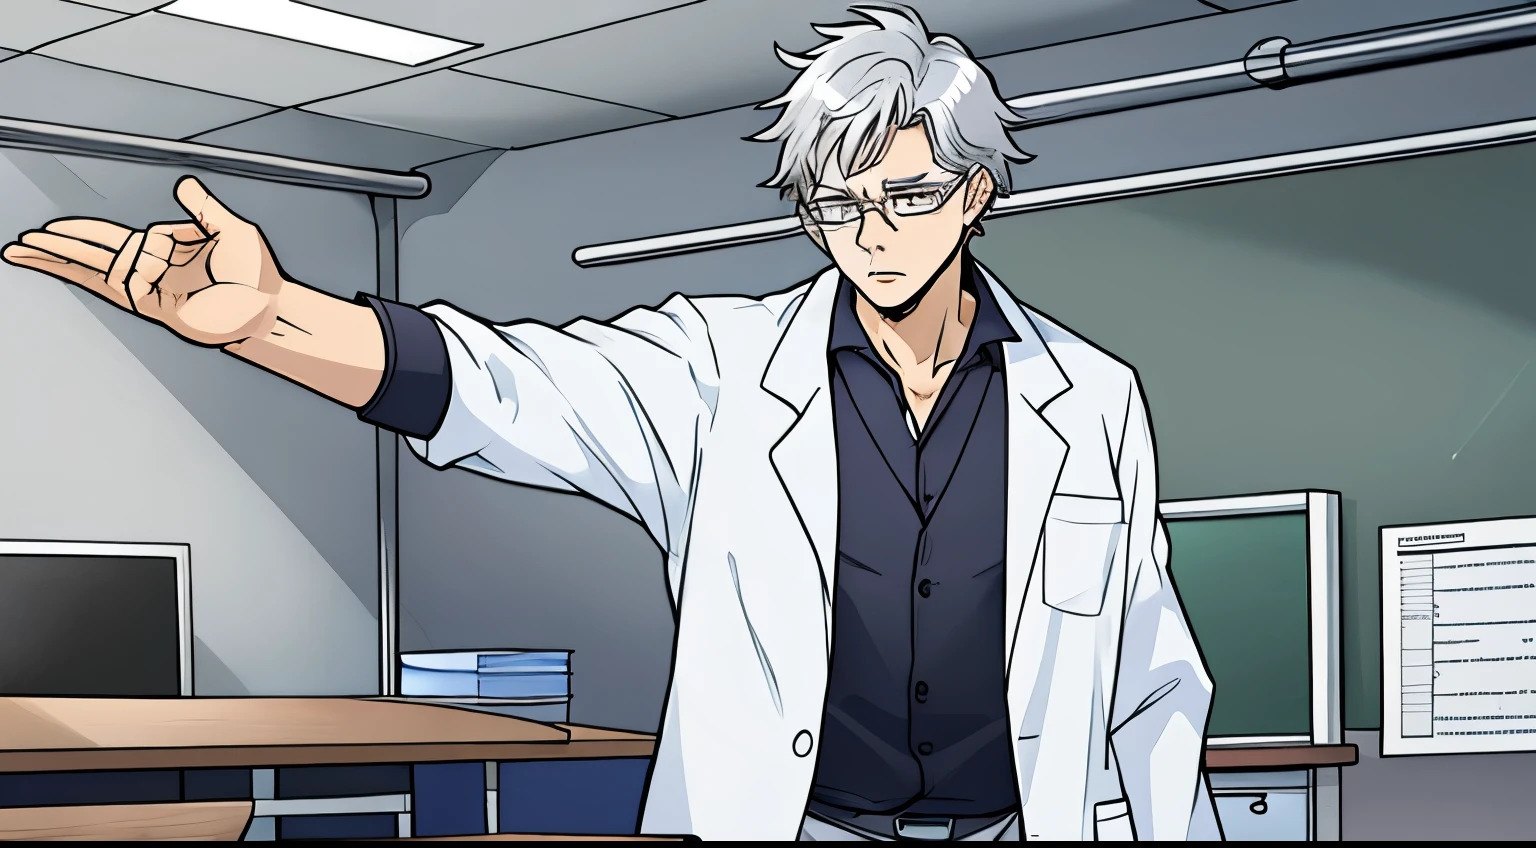 Silver haired teacher wearing lab coat and medical glasses, he looks scared